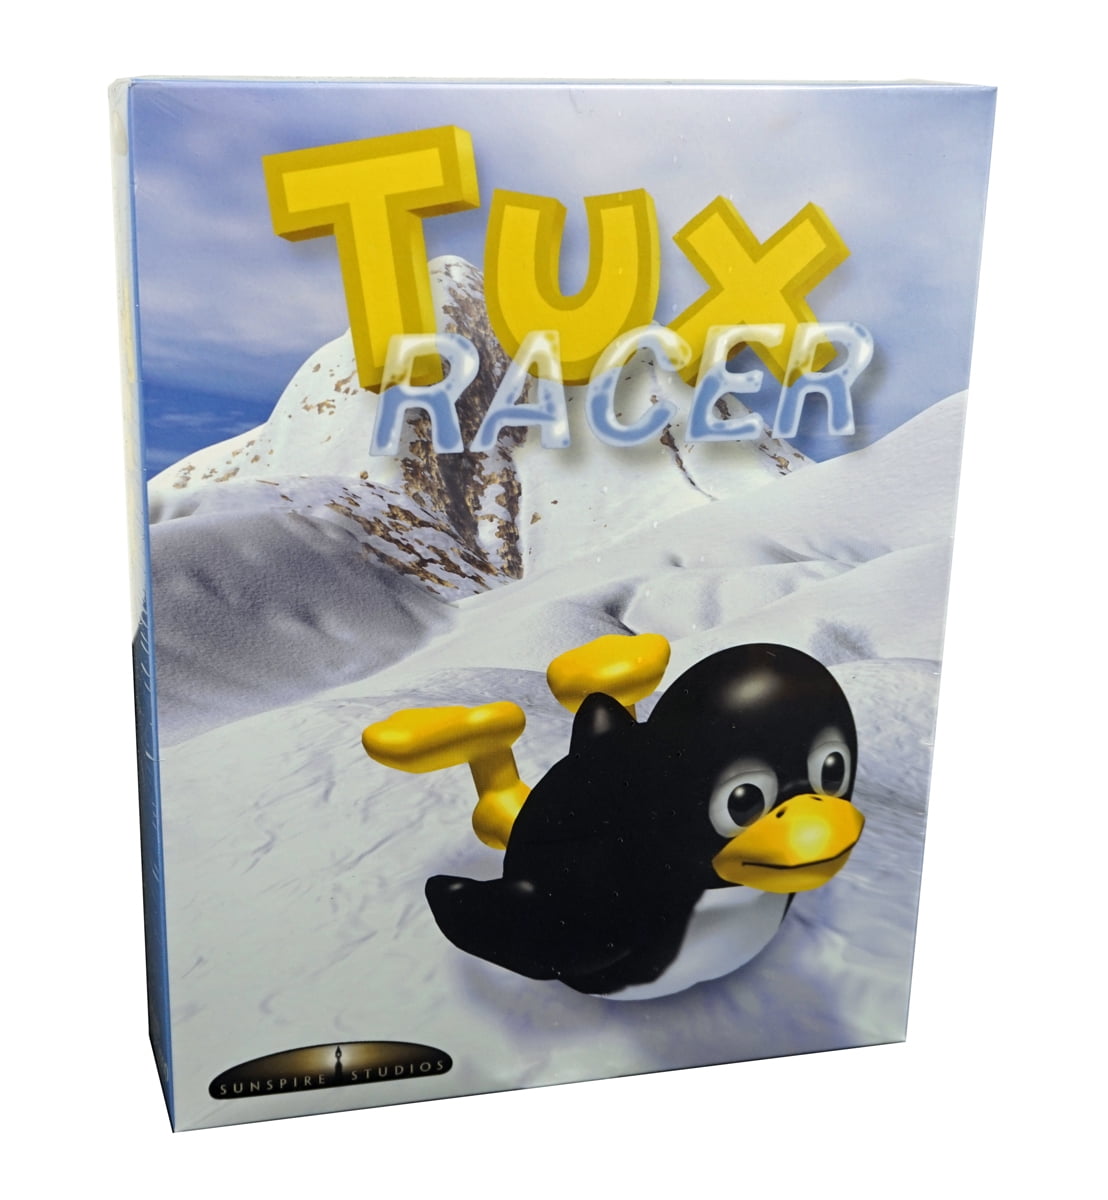 Tux Racer Pc Game Watch Tux The Penguin Race Down The Snow Covered Mountains 18 Challenging Courses Walmart Com Walmart Com - roblox snow shredder